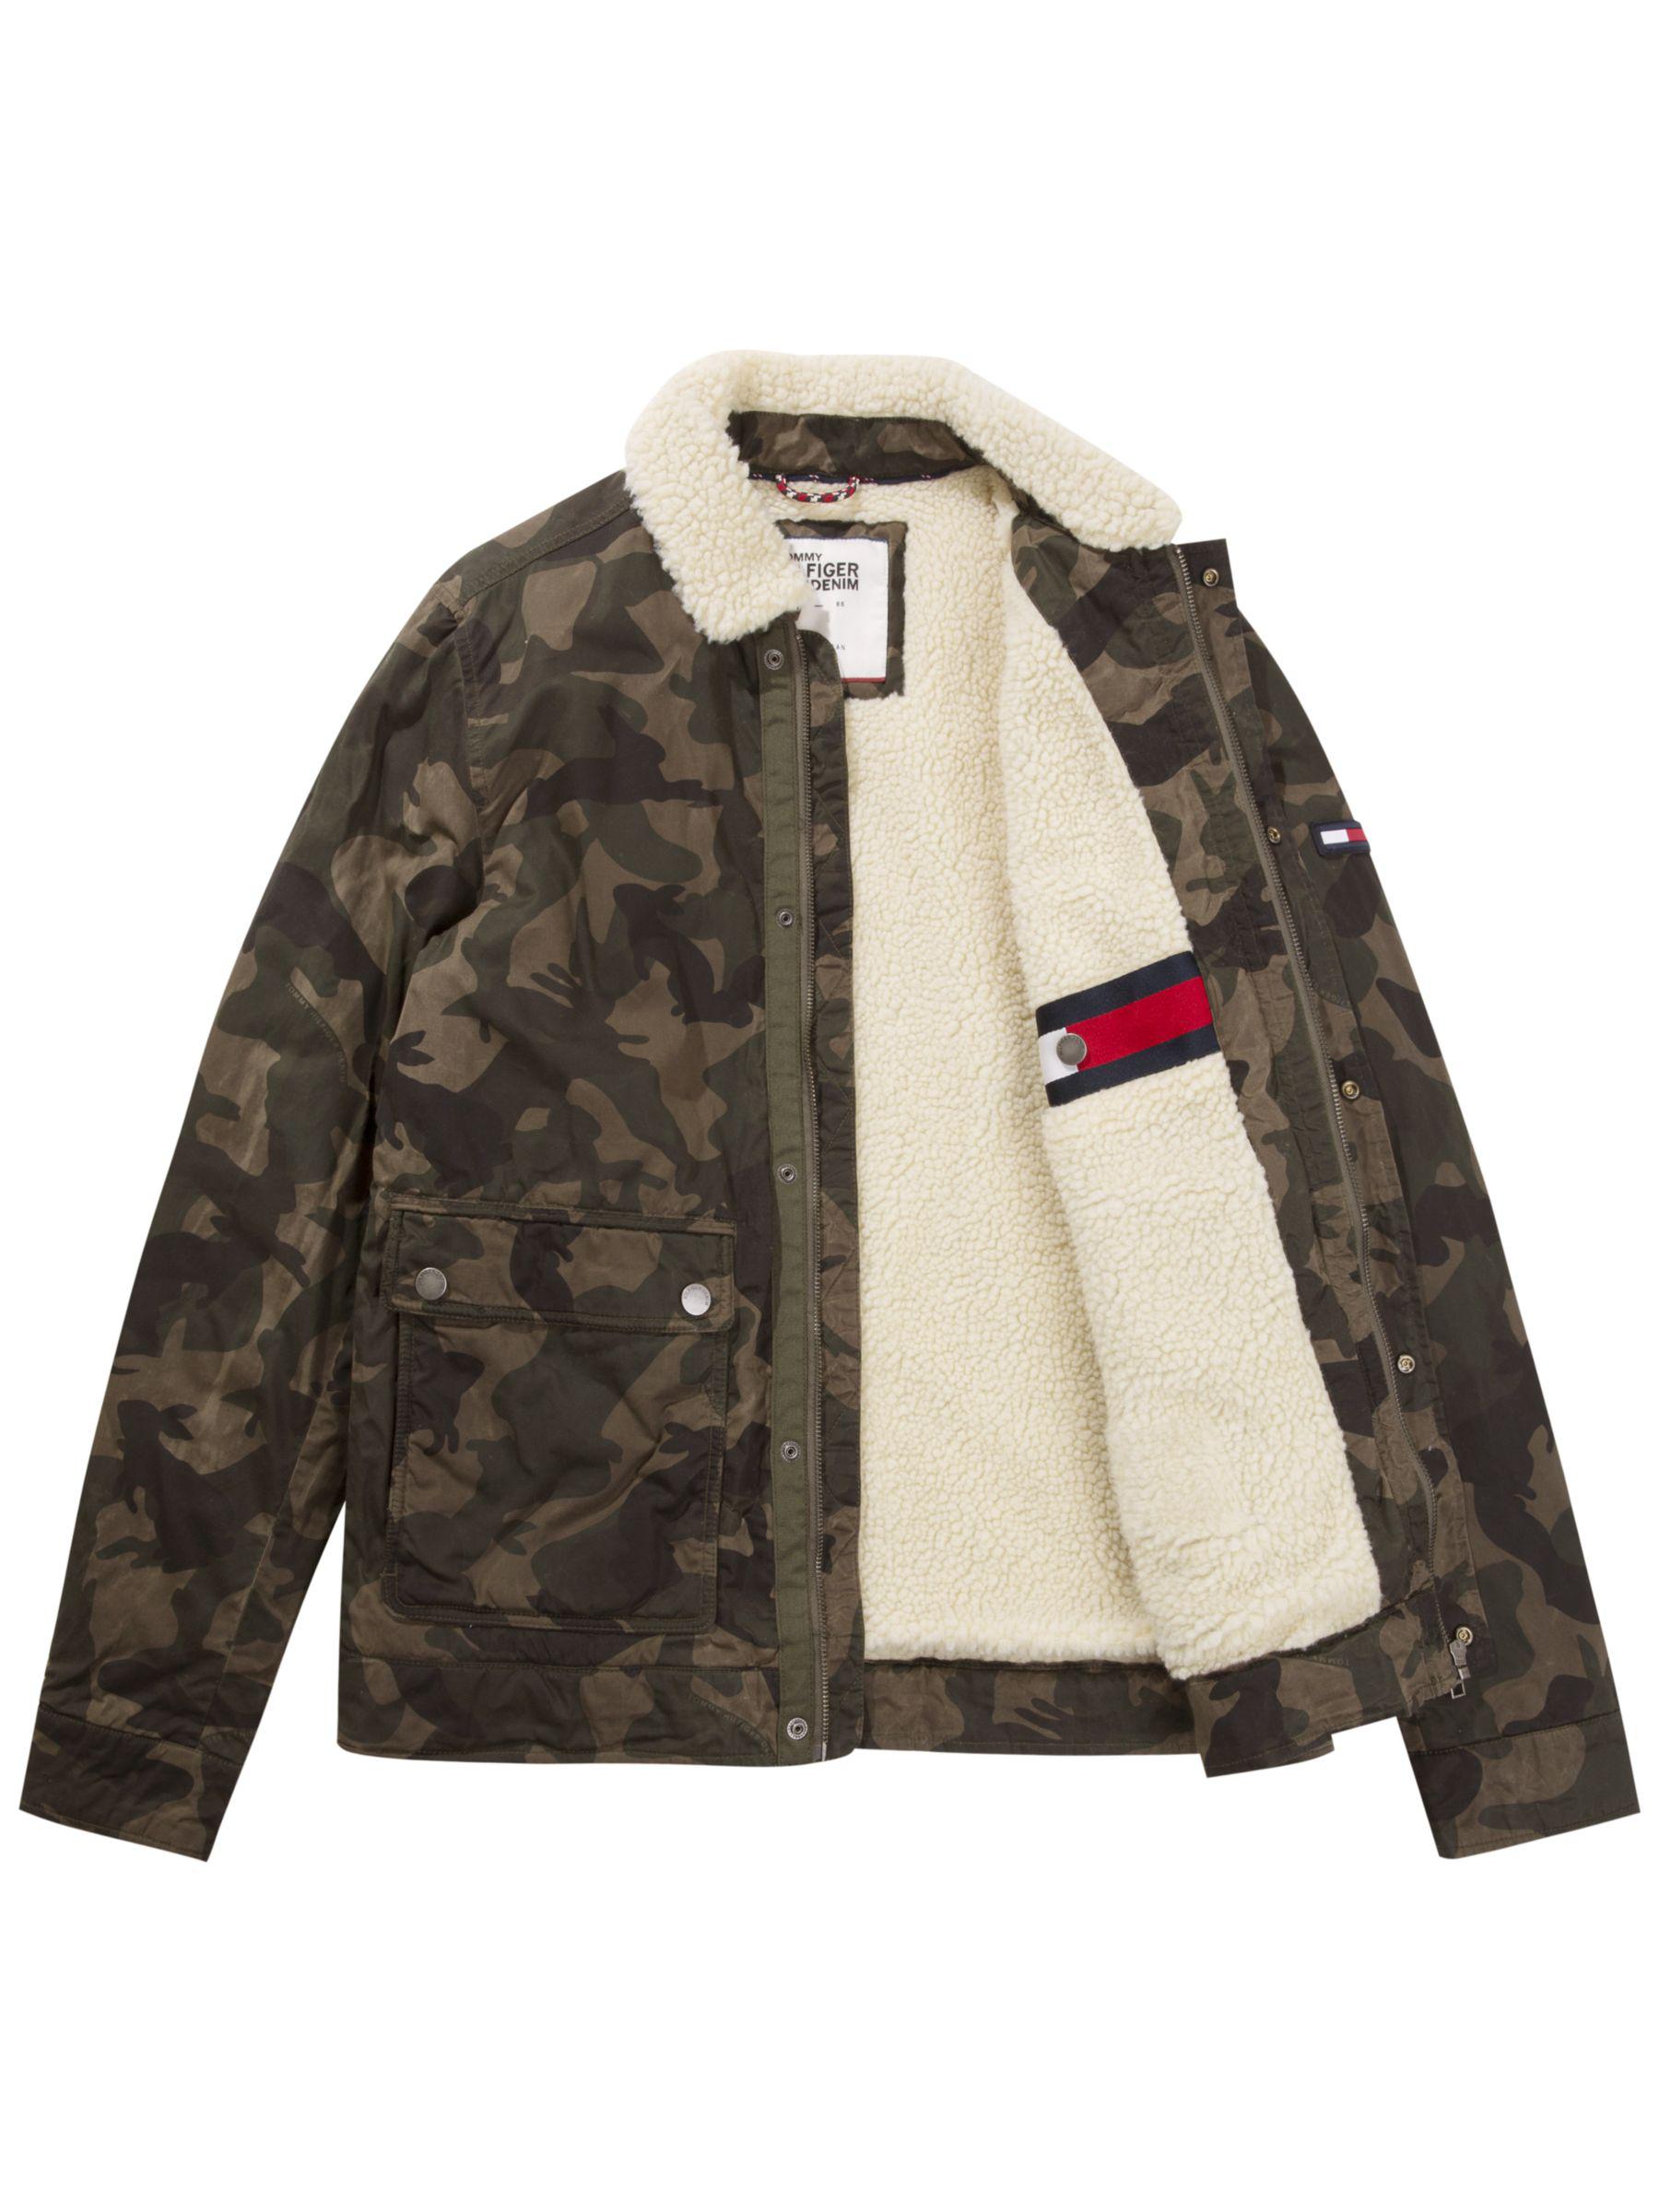 Tommy Jeans Camo Jacket Flash Sales, 50% OFF | www.nooralyaghin.com